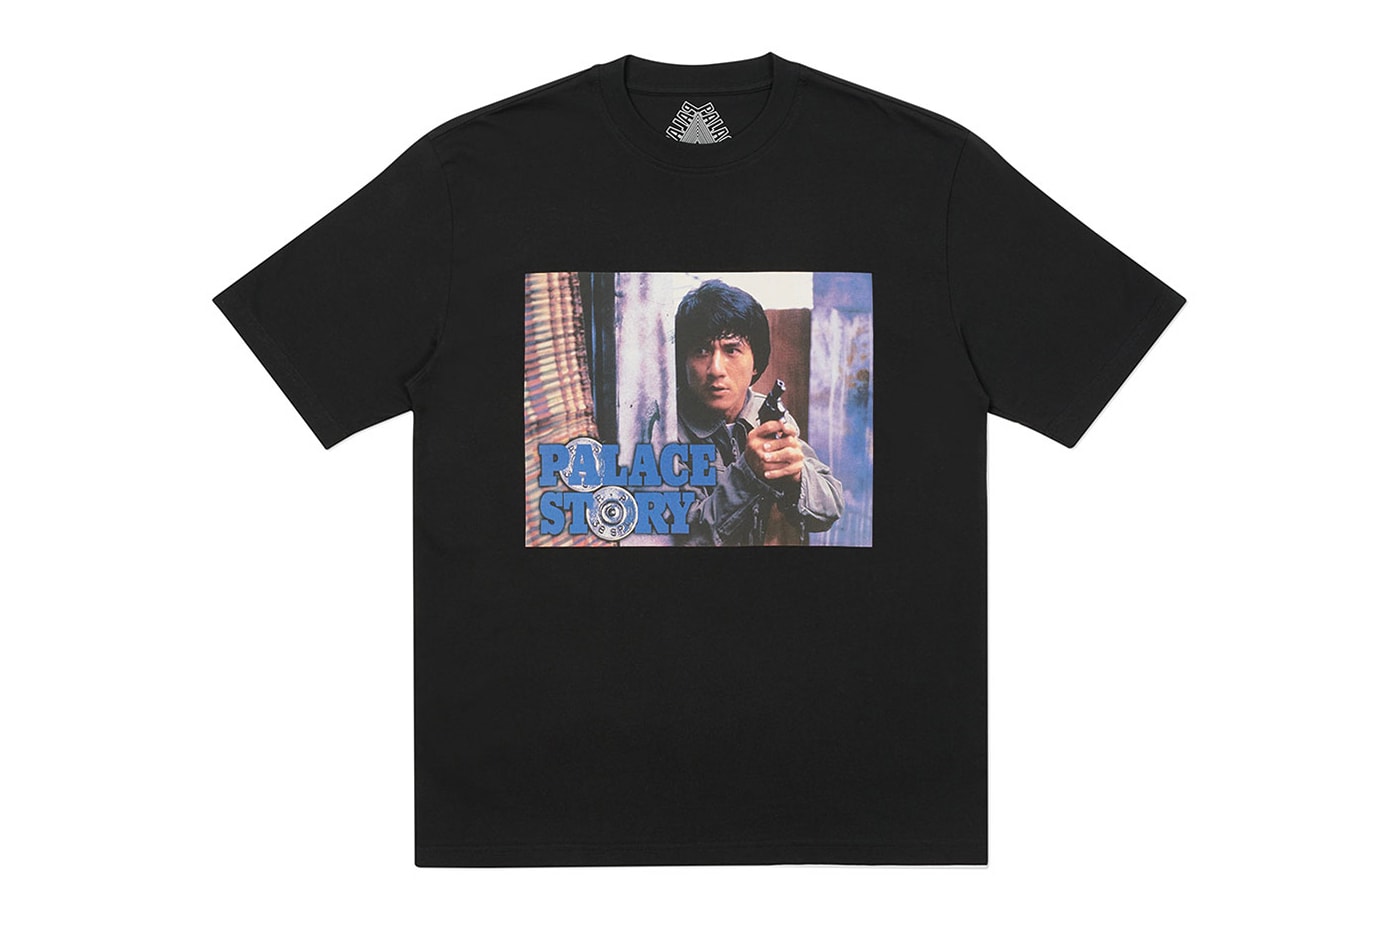 Palace Winter 2020 Tees T Shirts beer twi ferg jersey collection drop info